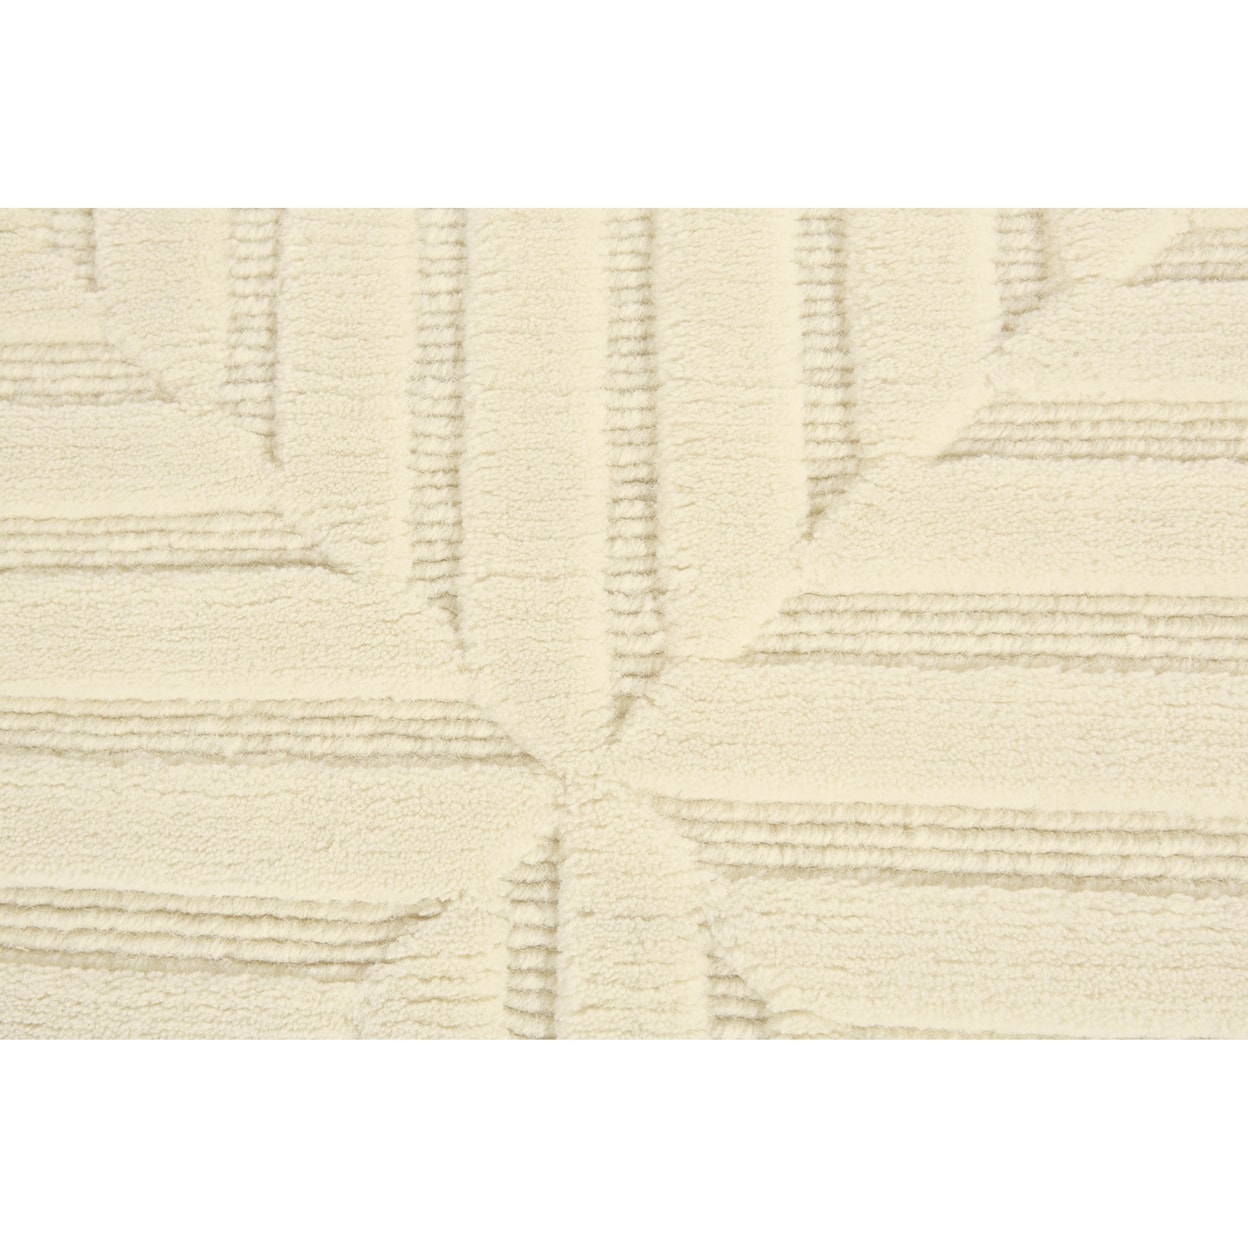 Feizy Rugs Channels Ivory 9'-6" x 13'-6" Area Rug